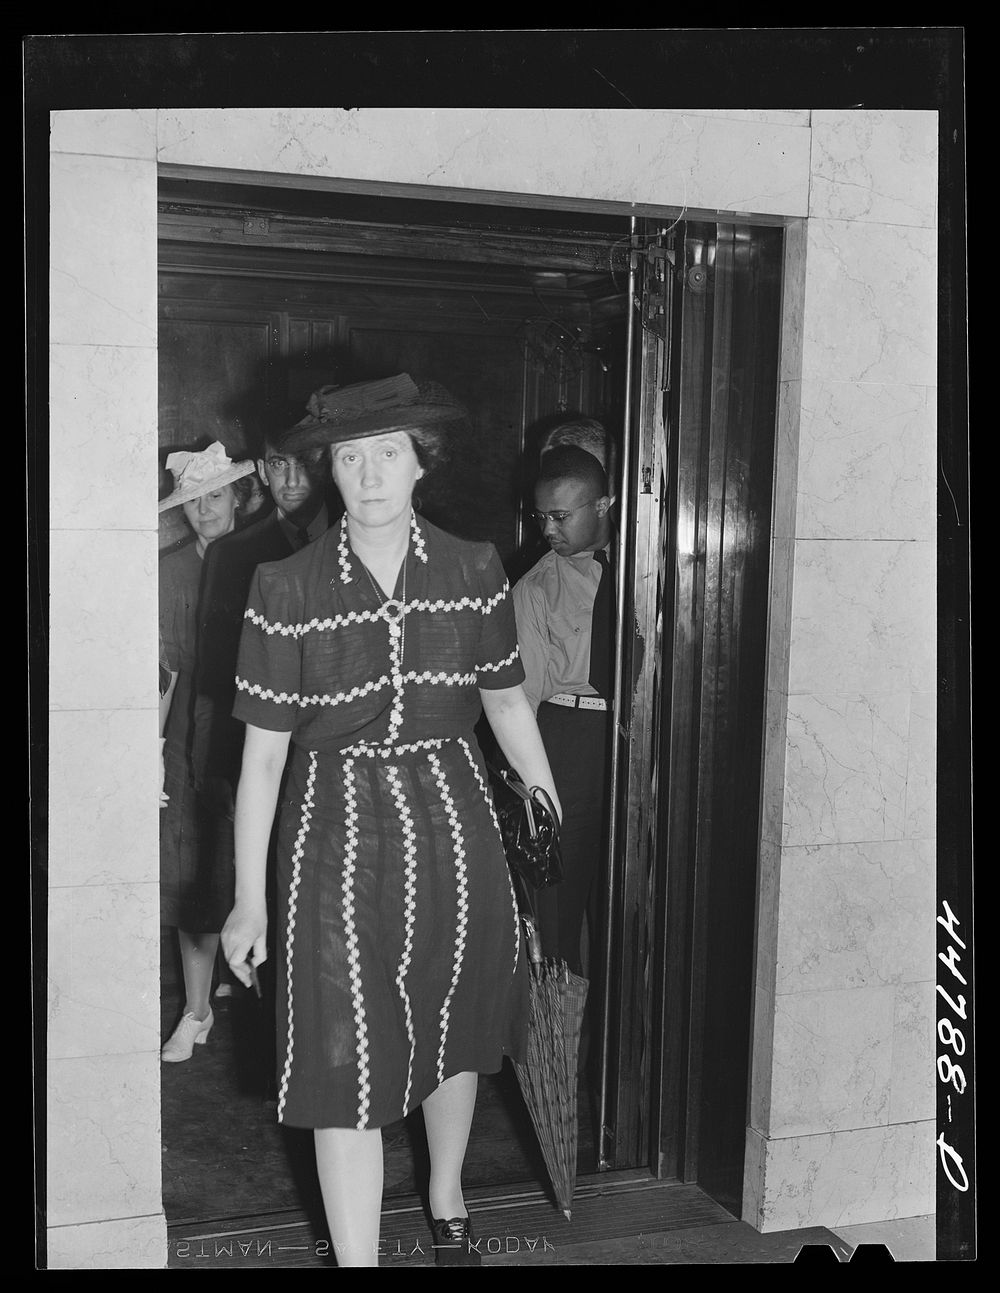 [Untitled photo, possibly related to: Elevator operator in the Barr Building. Washington, D.C.]. Sourced from the Library of…